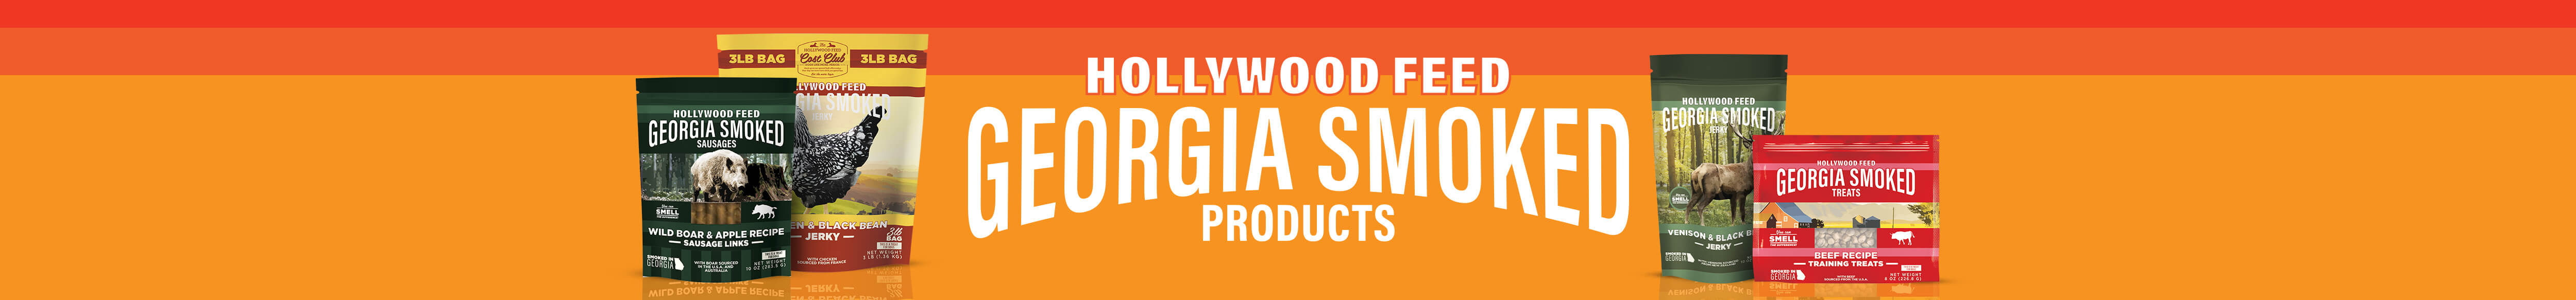 Hollywood Feed Georgia Smoked Products